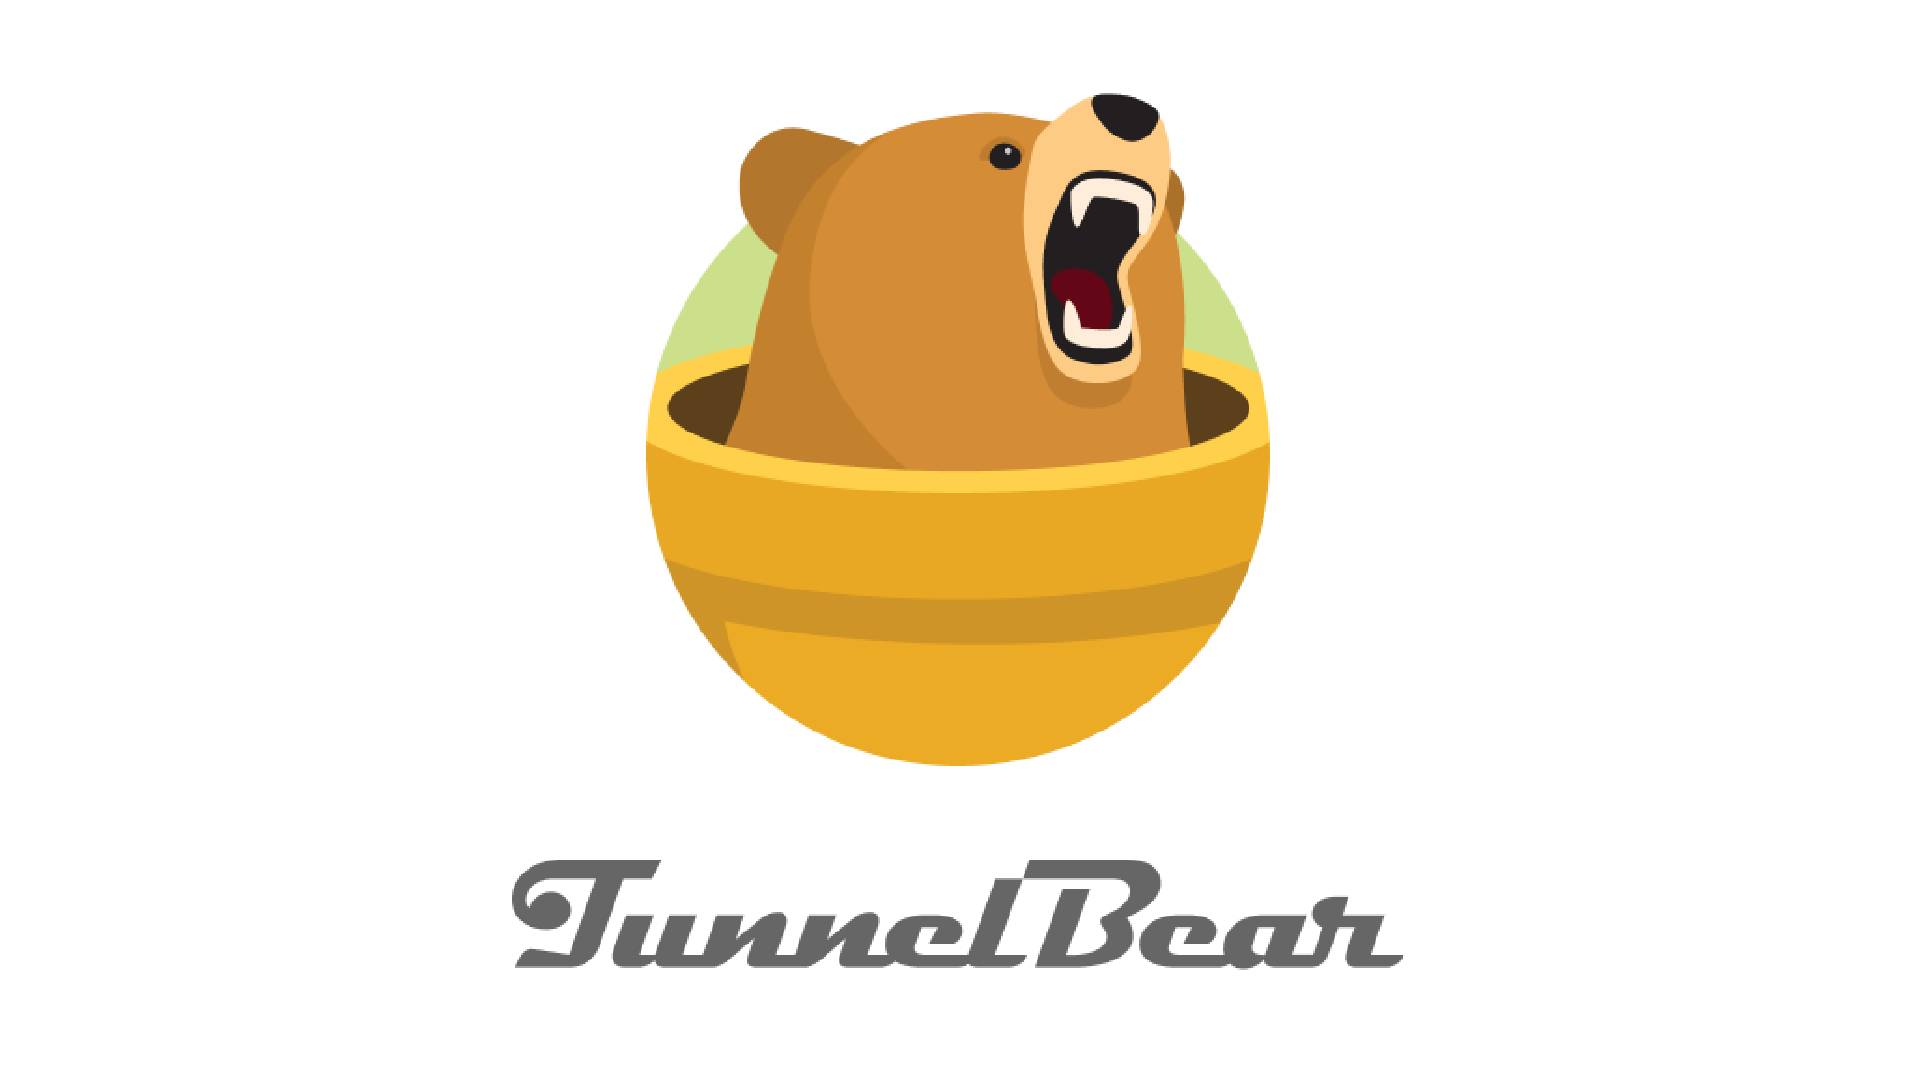 VPN costs for Tunnelbear. Image shows the company logo.